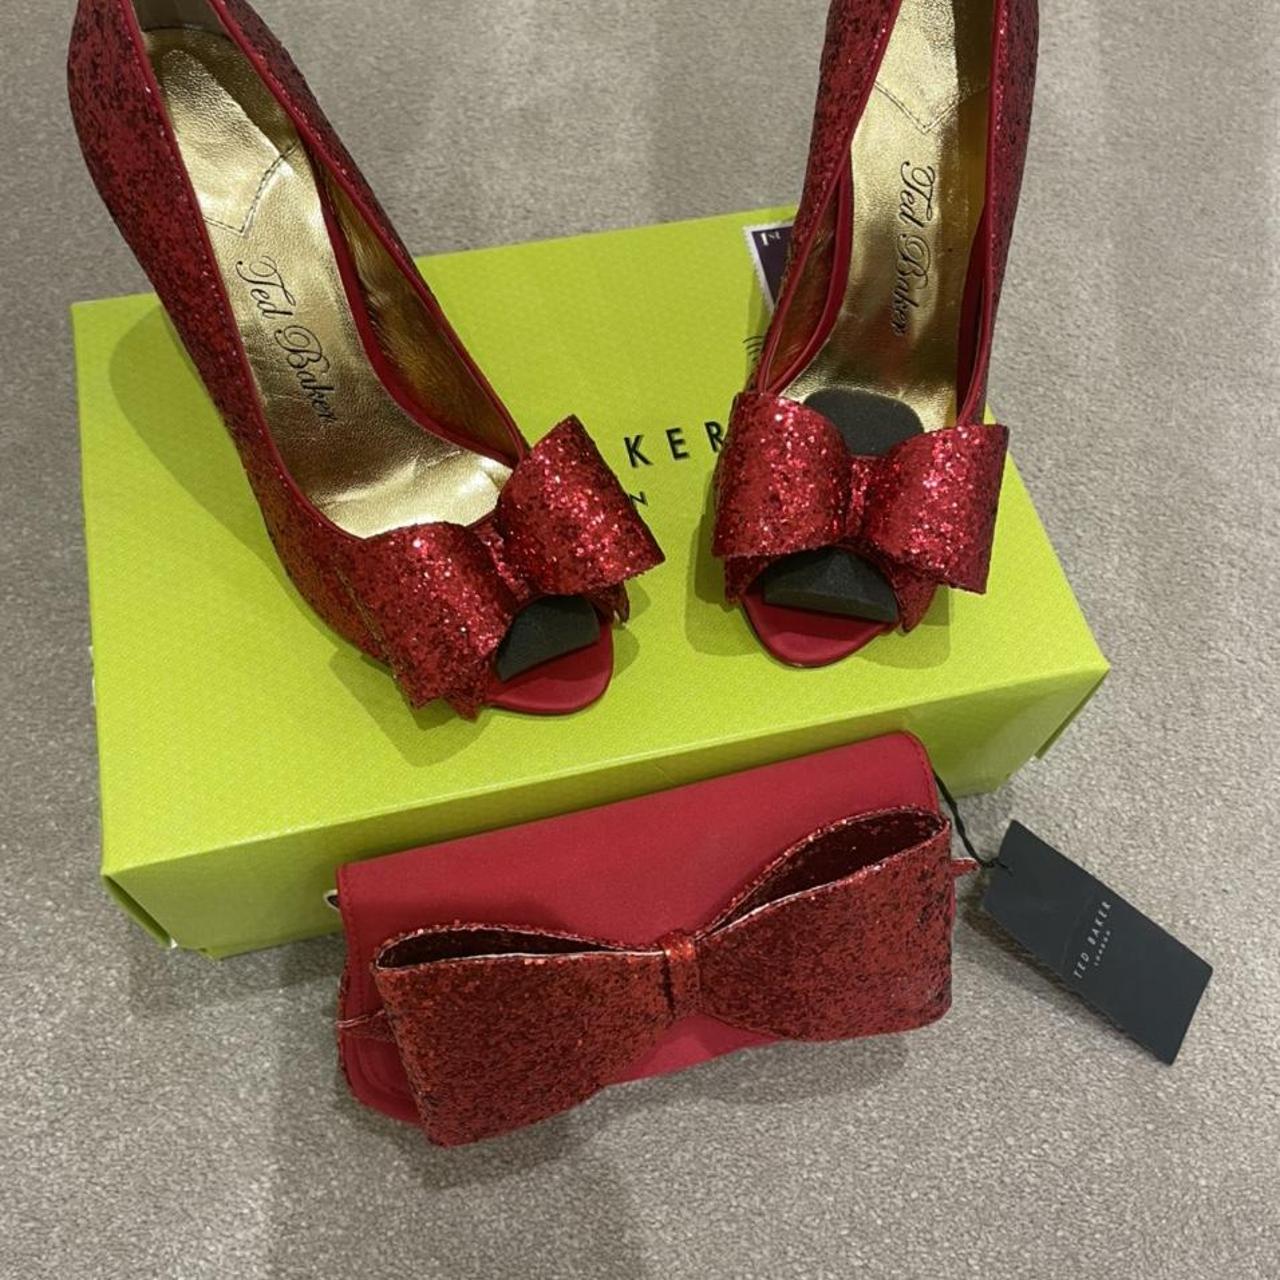 Ted Baker shoes and bag shoes size 3 - Depop